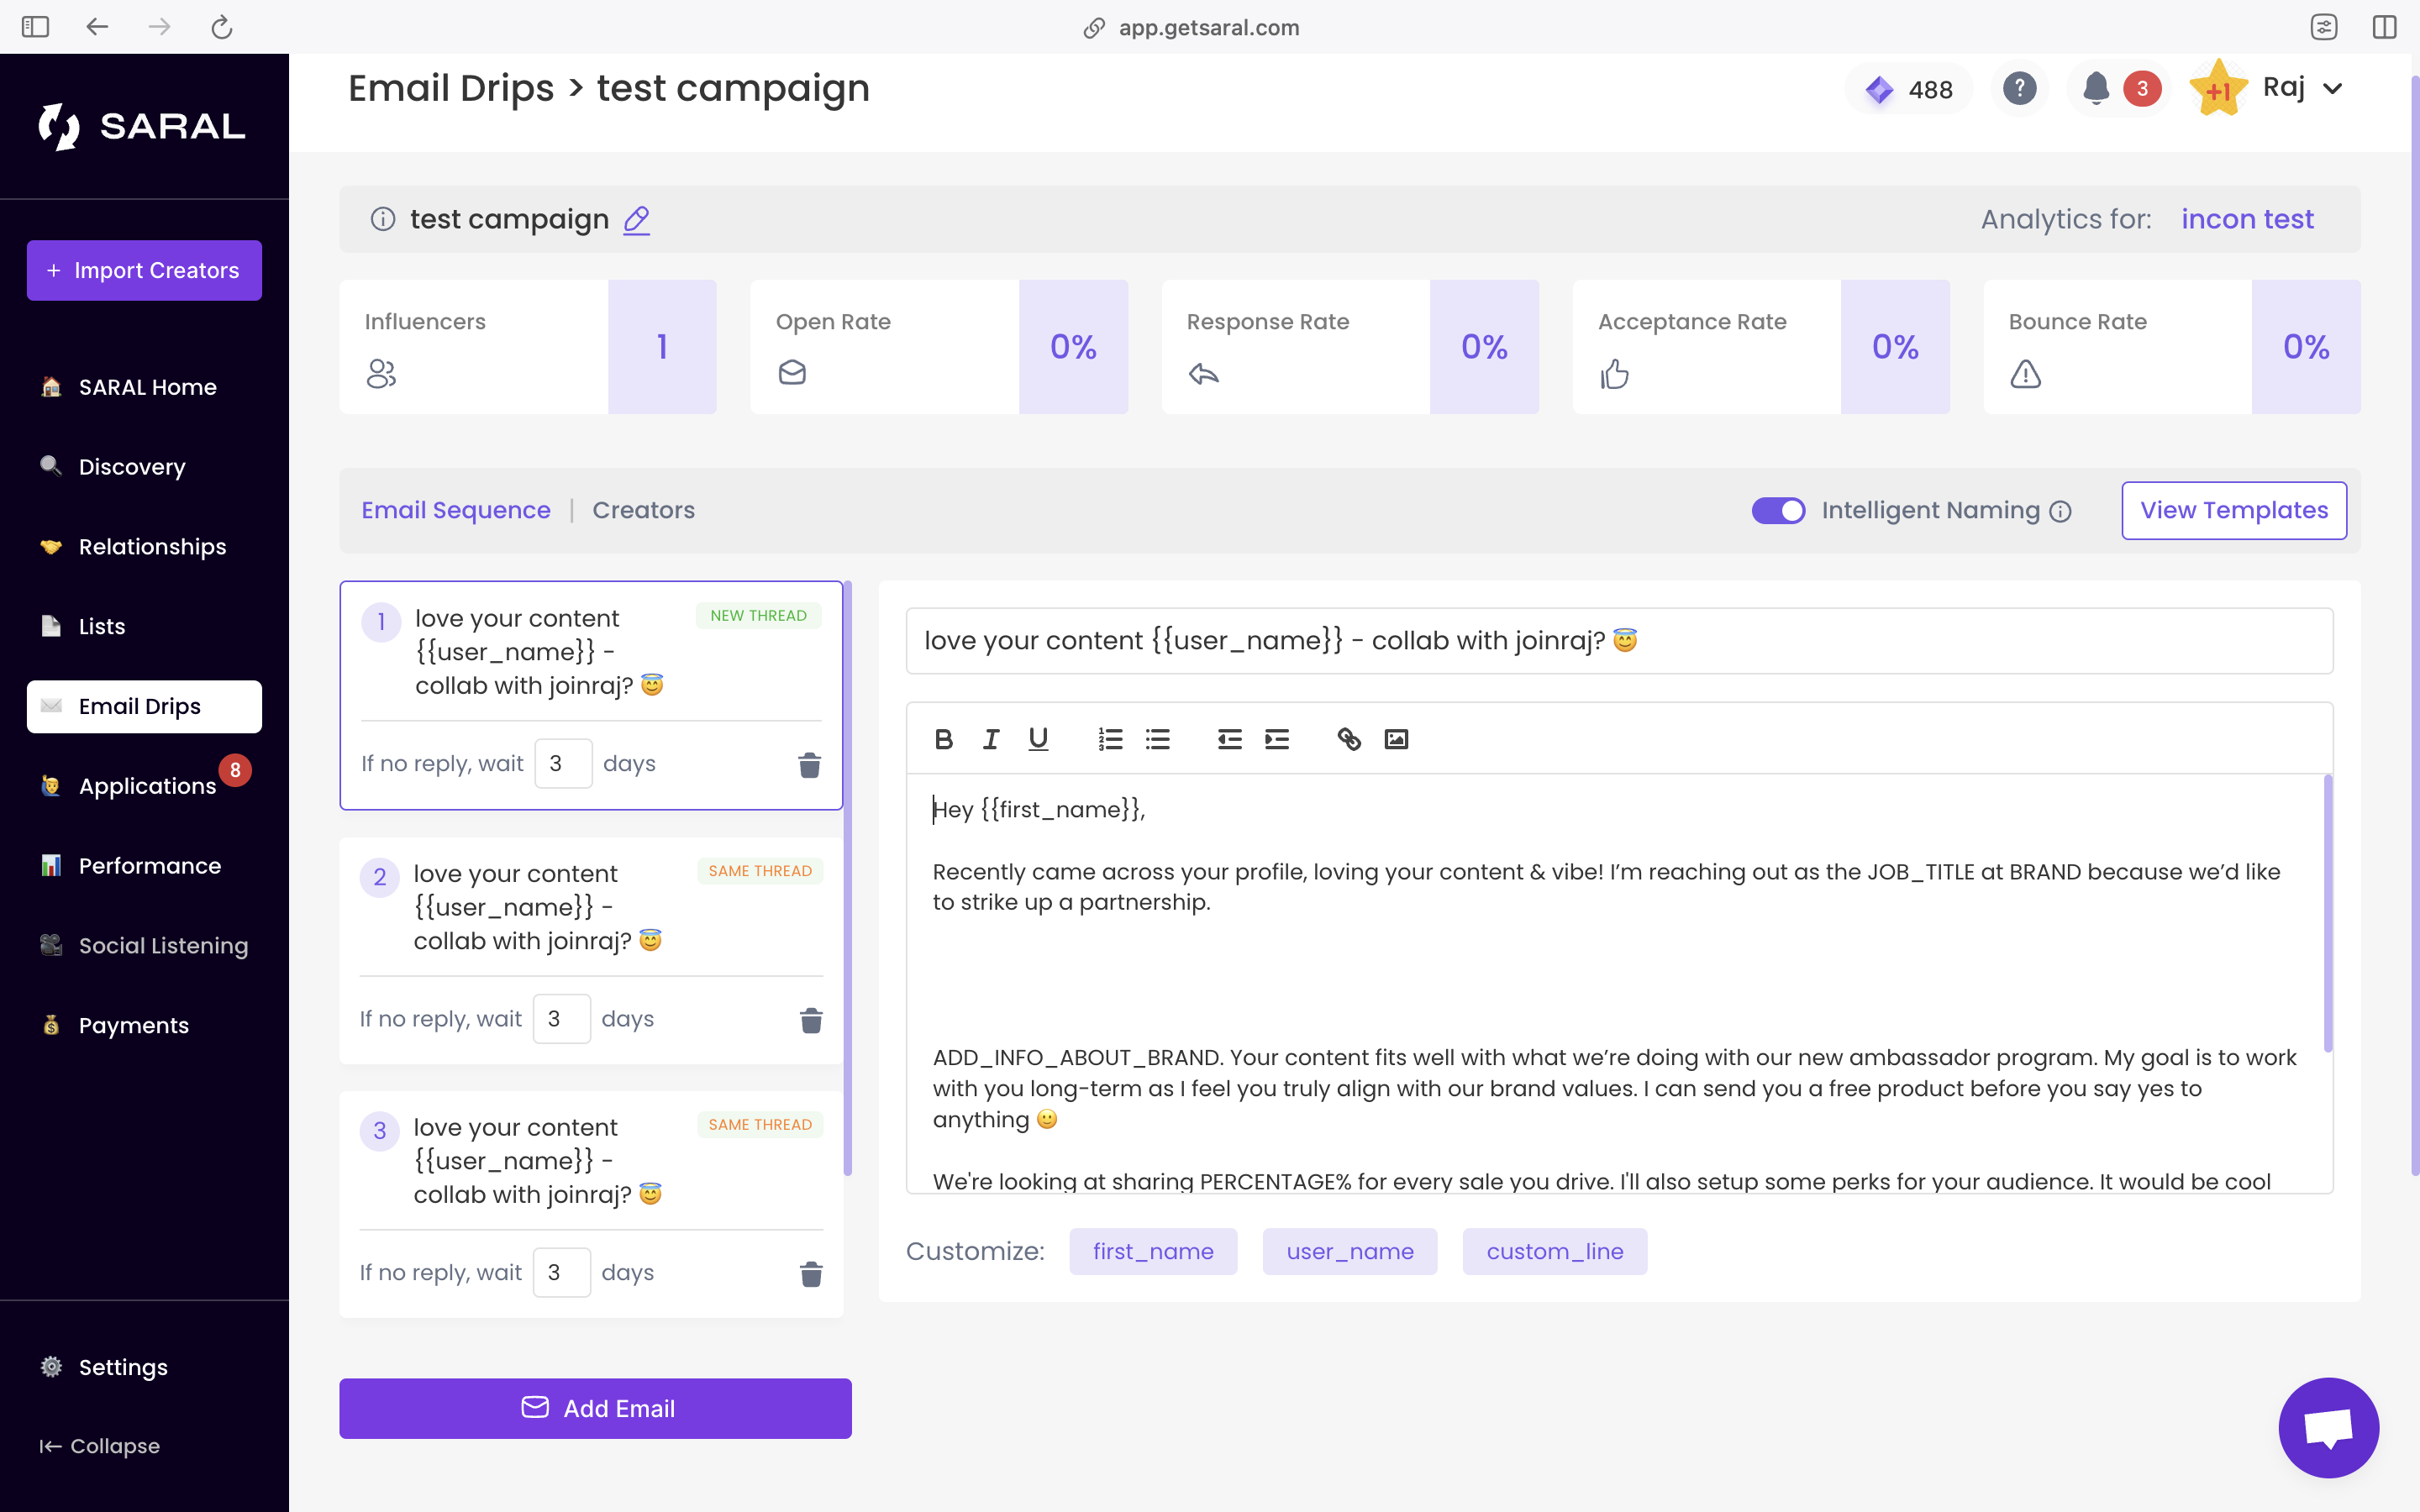 Launch automated outbound email campaigns using templates proven to be effective, ensuring that influencers will say 'yes'!